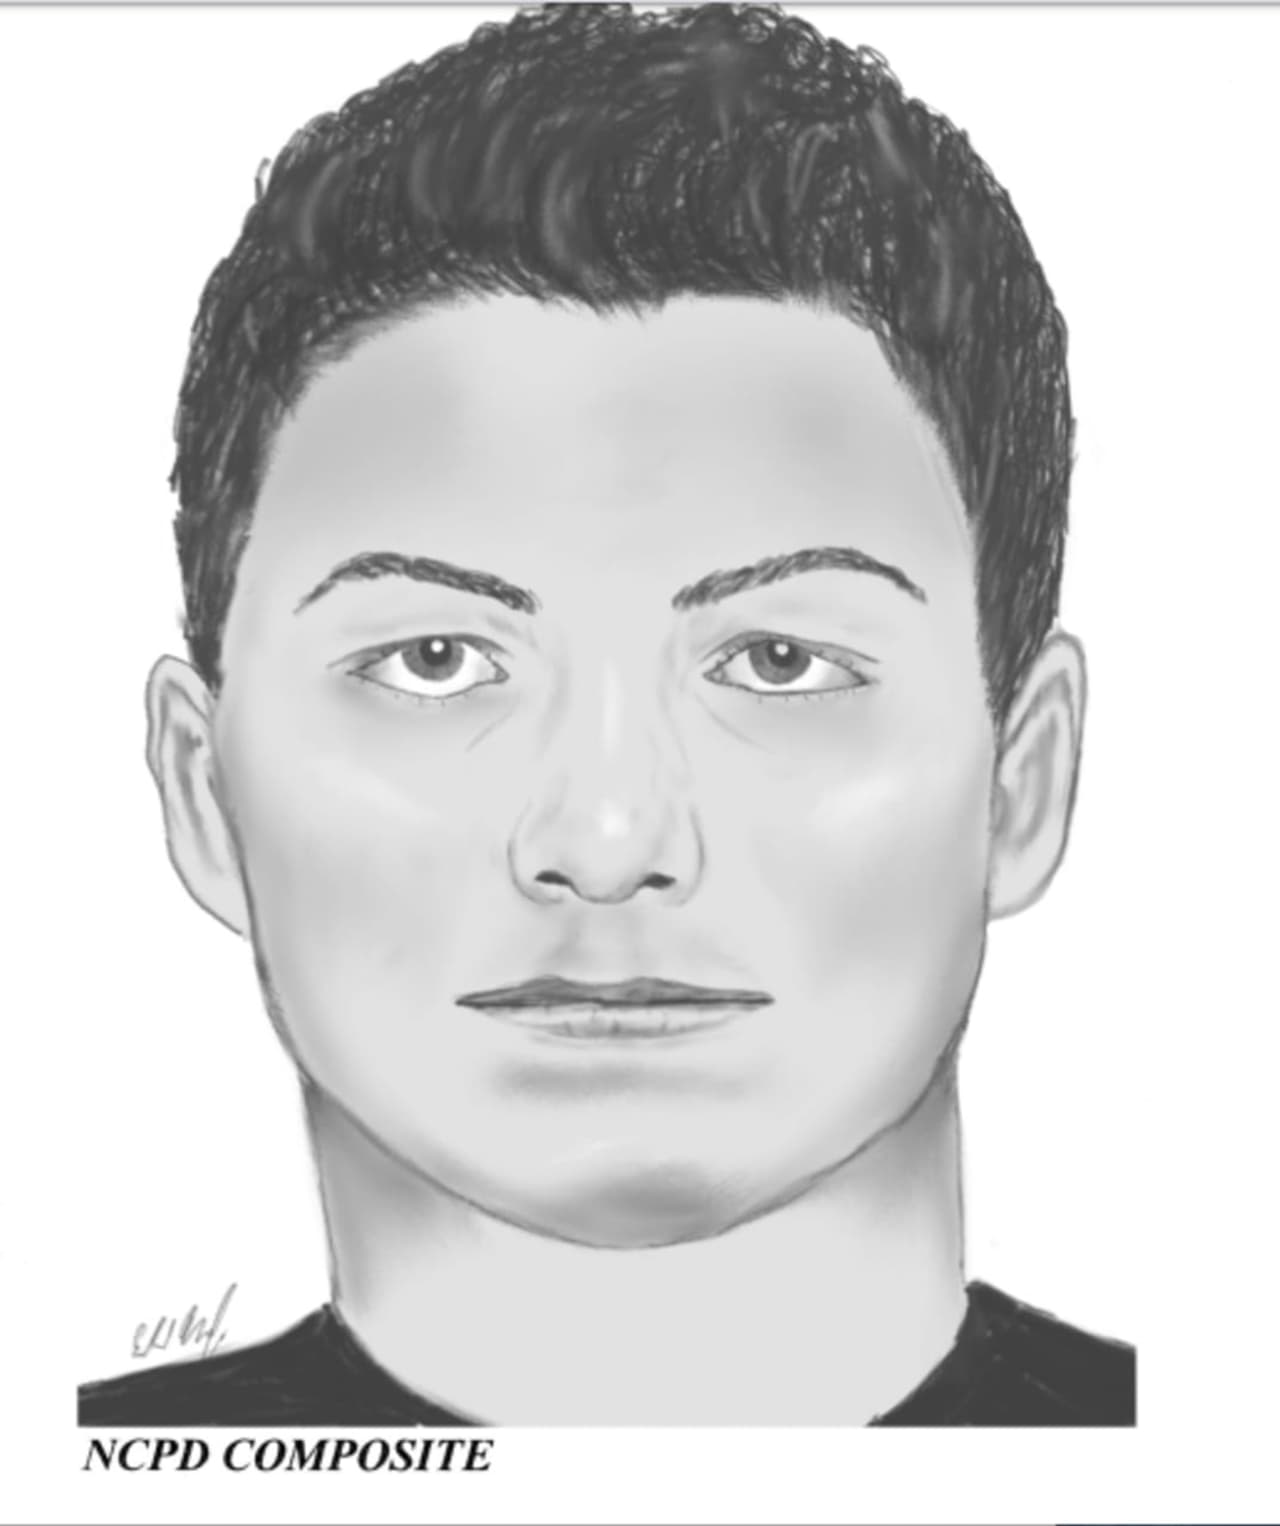 Police are asking the public's help in identifying the man shown in this composite sketch who is accused of grabbing a teenage girl at a Long Island park.